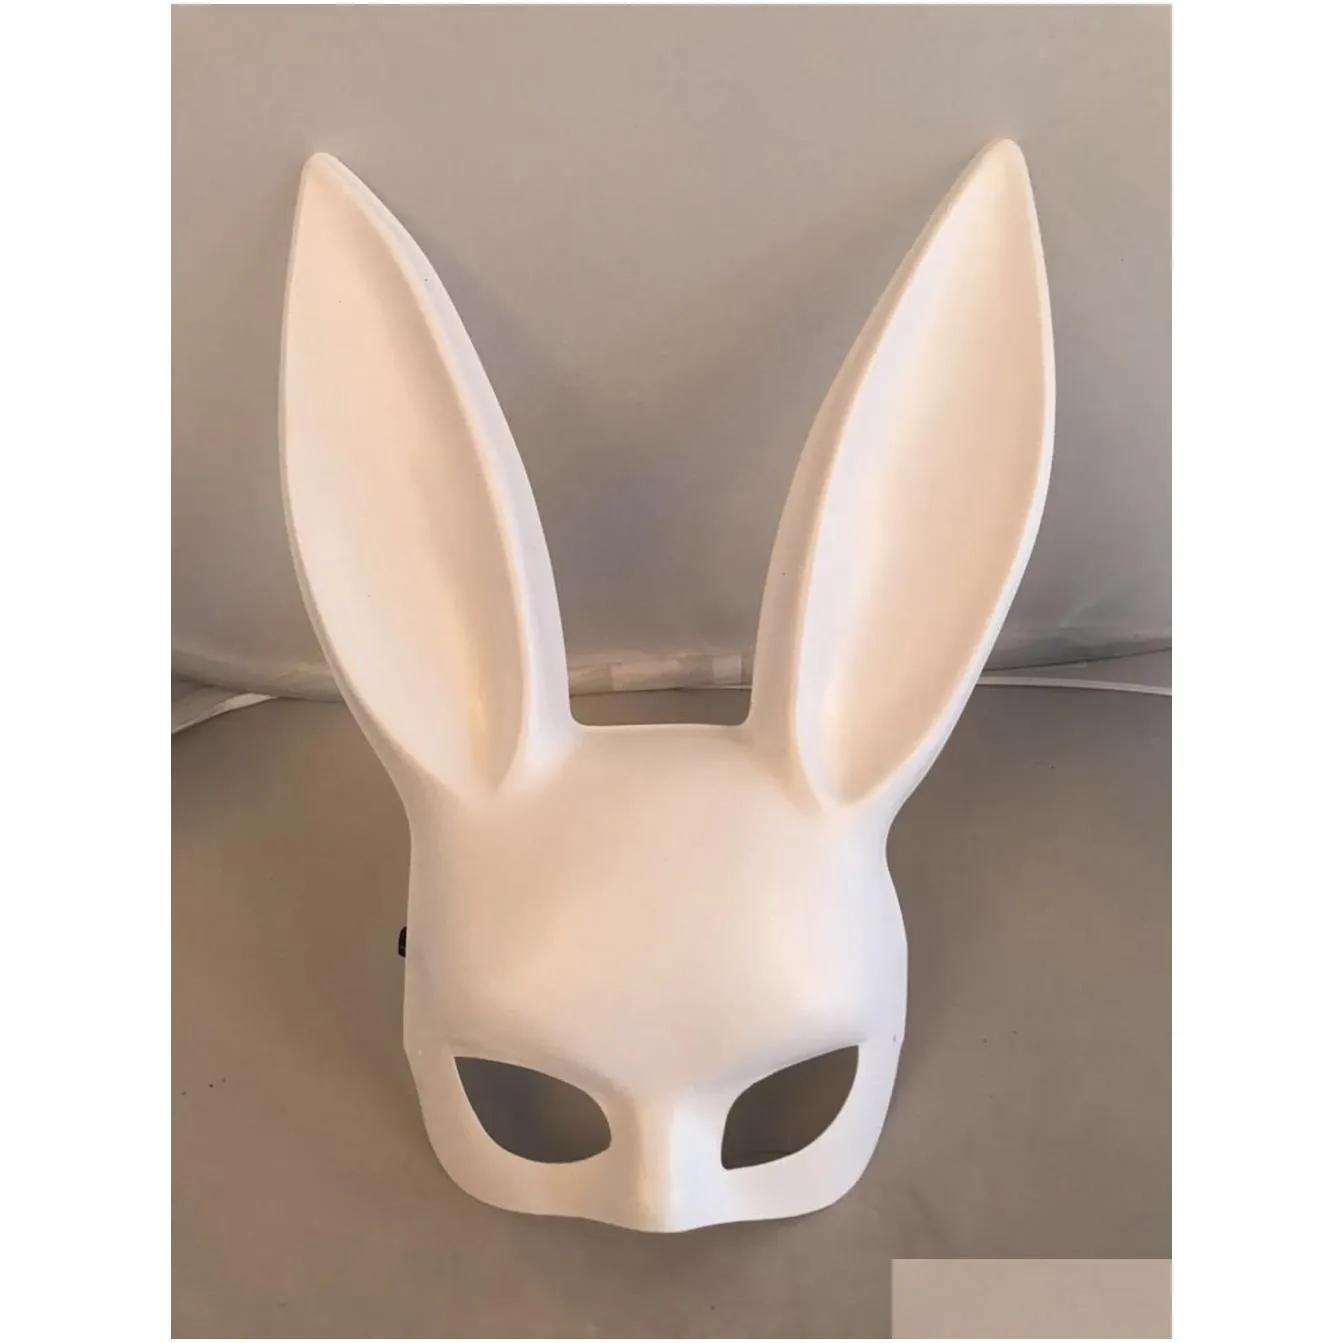 Party Masks 5Pcs Bunny Masks Rabbit Ear Mask Womens Costume Showgirl Dance Prop Rabbits Masquerade Simply Gorgeous Bunnies Ears Party Dhlha